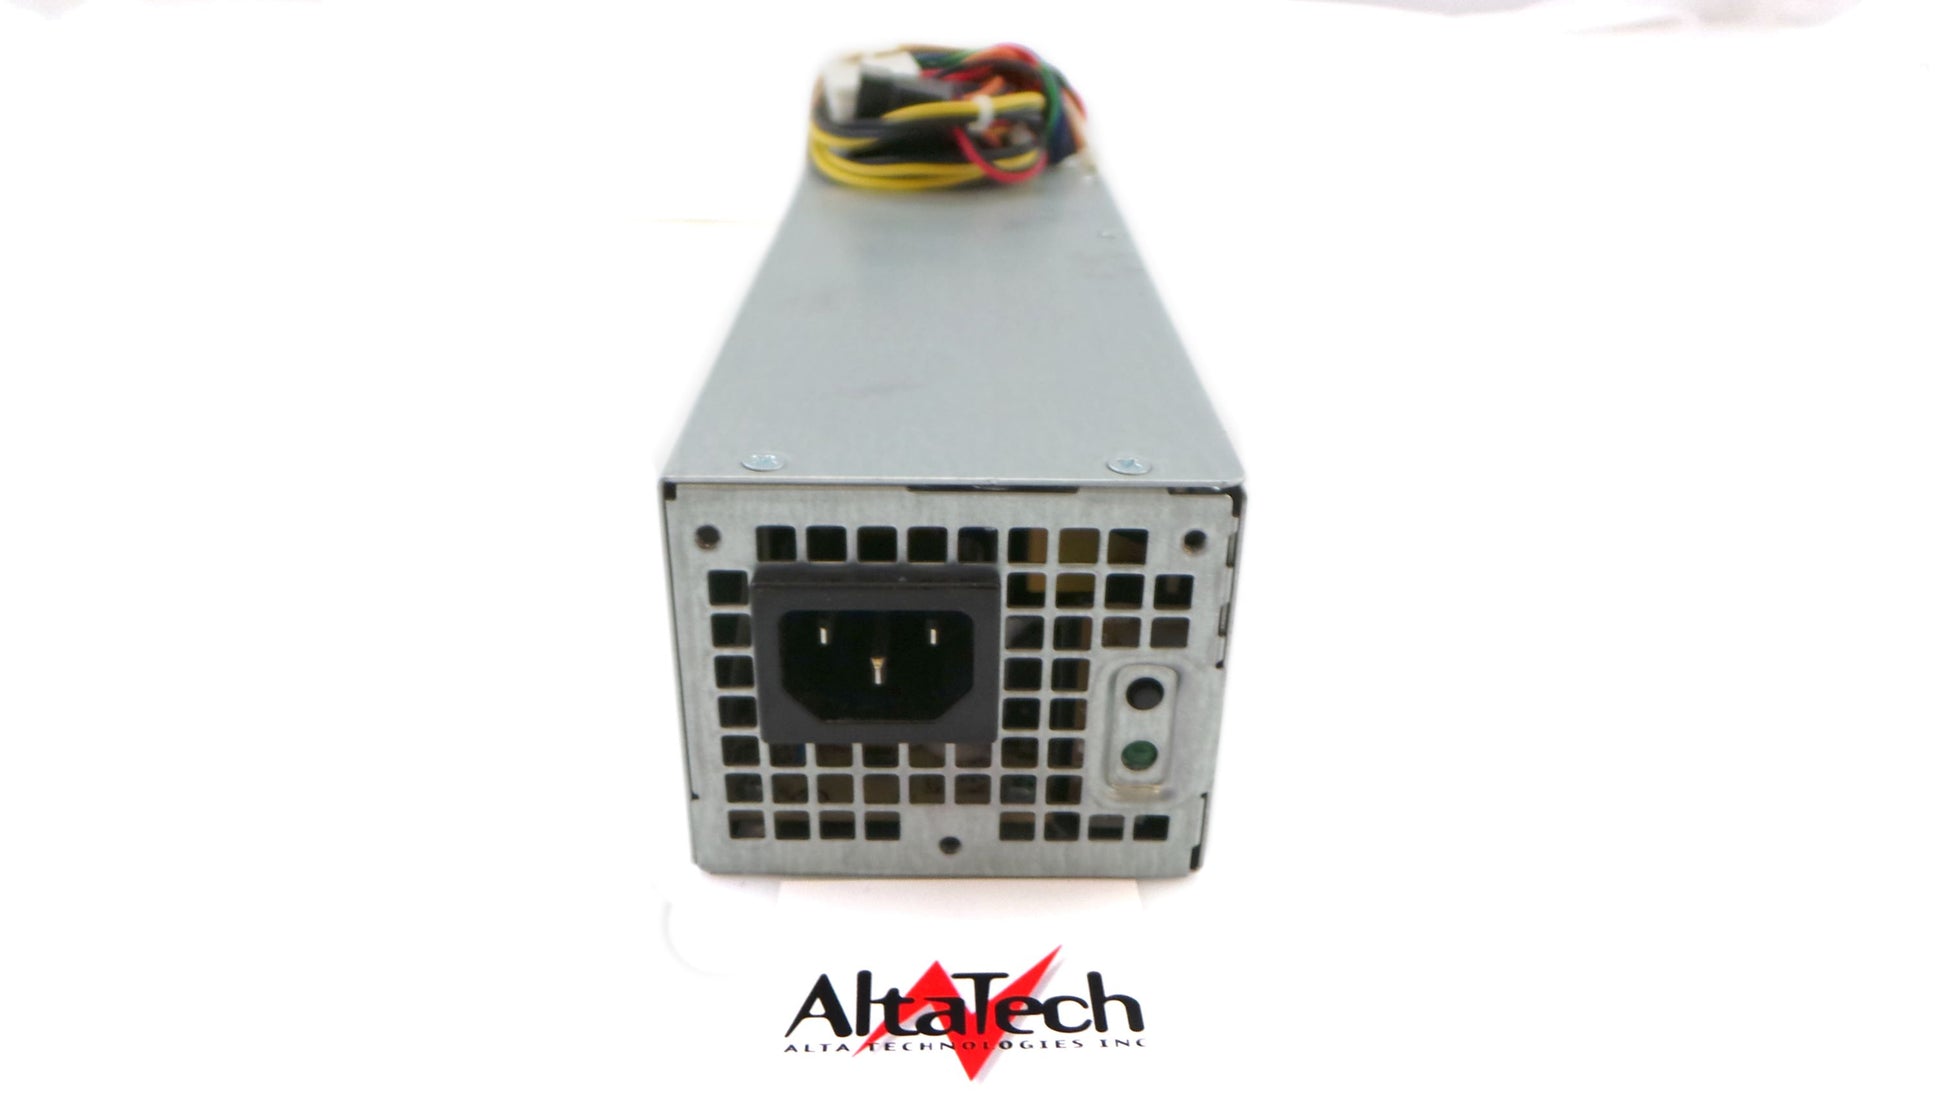 Dell 709MT 240W Power Supply Unit for OptiPlex 3010/7010/390/790/990, Used